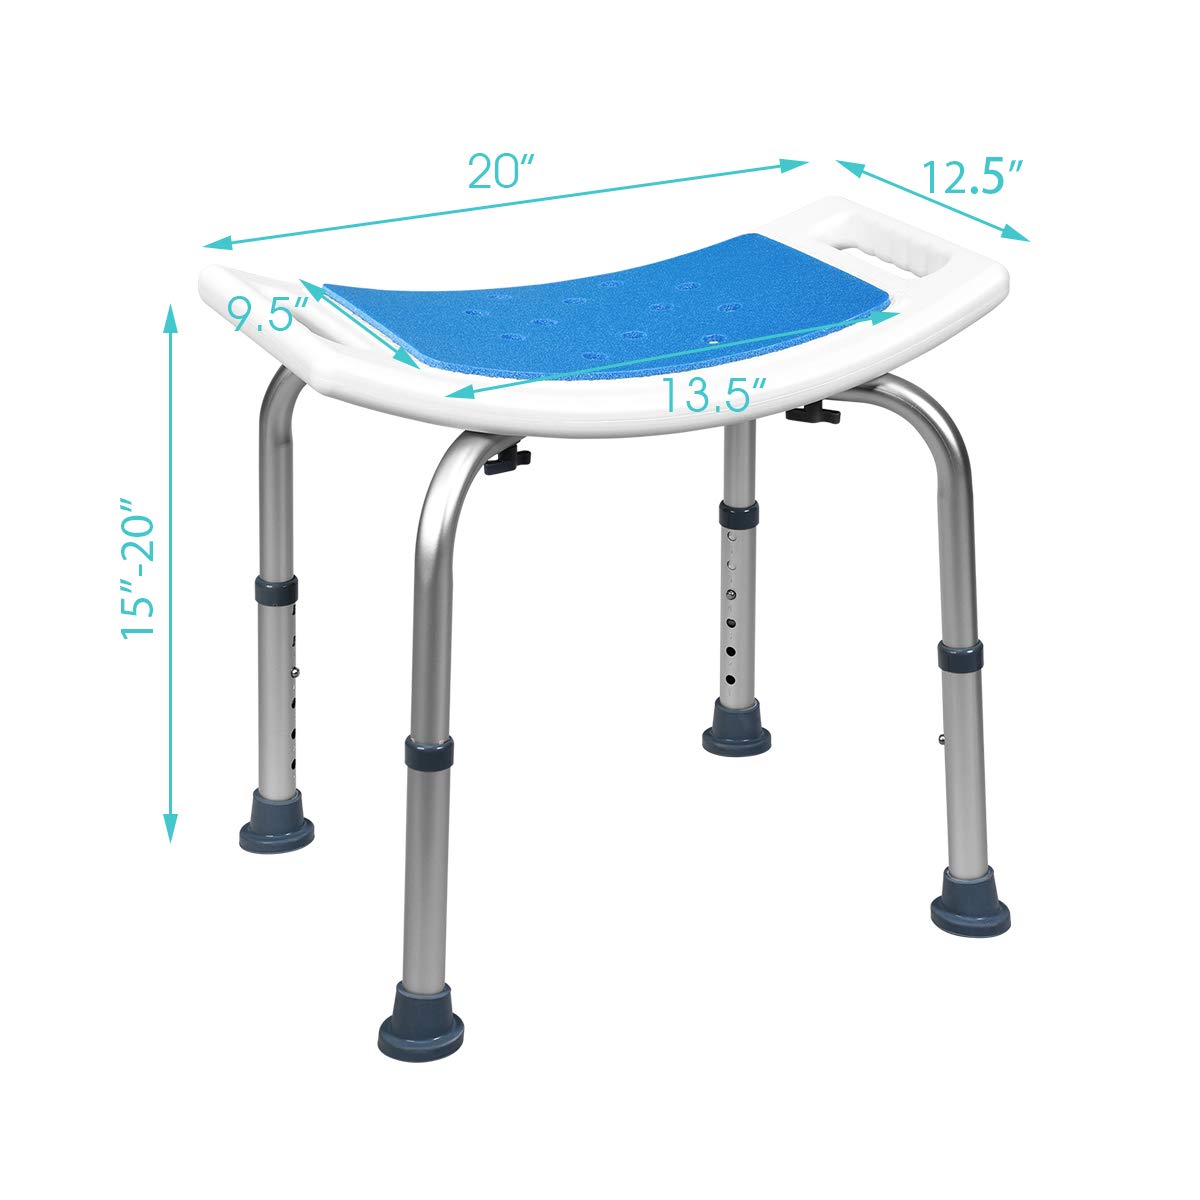 Giantex Shower Bench Adjustable Lightweight Shower Stool with Padded Seat & Built-in Handle